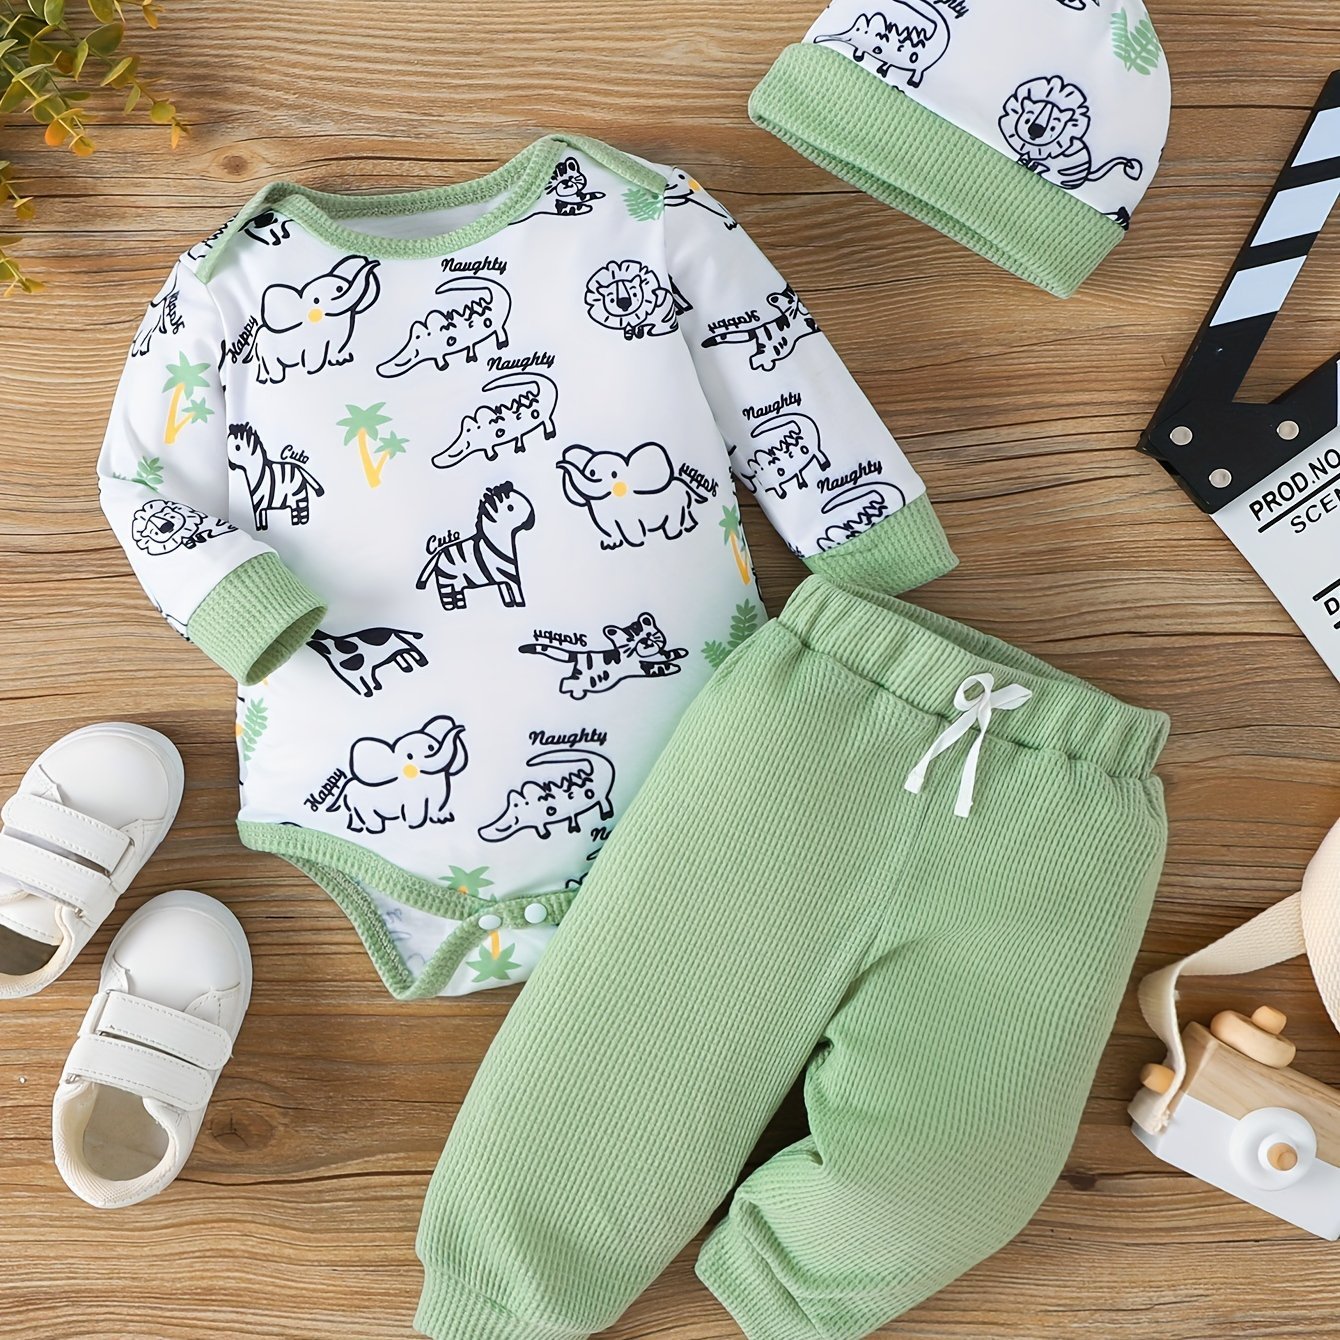 3pcs Unisex Newborn Baby Animal Print Outfit Set - Soft & Cozy Bodysuit, Pants & Hat - Adorable Long Sleeve Crew Neck Designs for Toddler Boys and Girls - Perfect All - Season Wardrobe Essential - Ammpoure Wellbeing